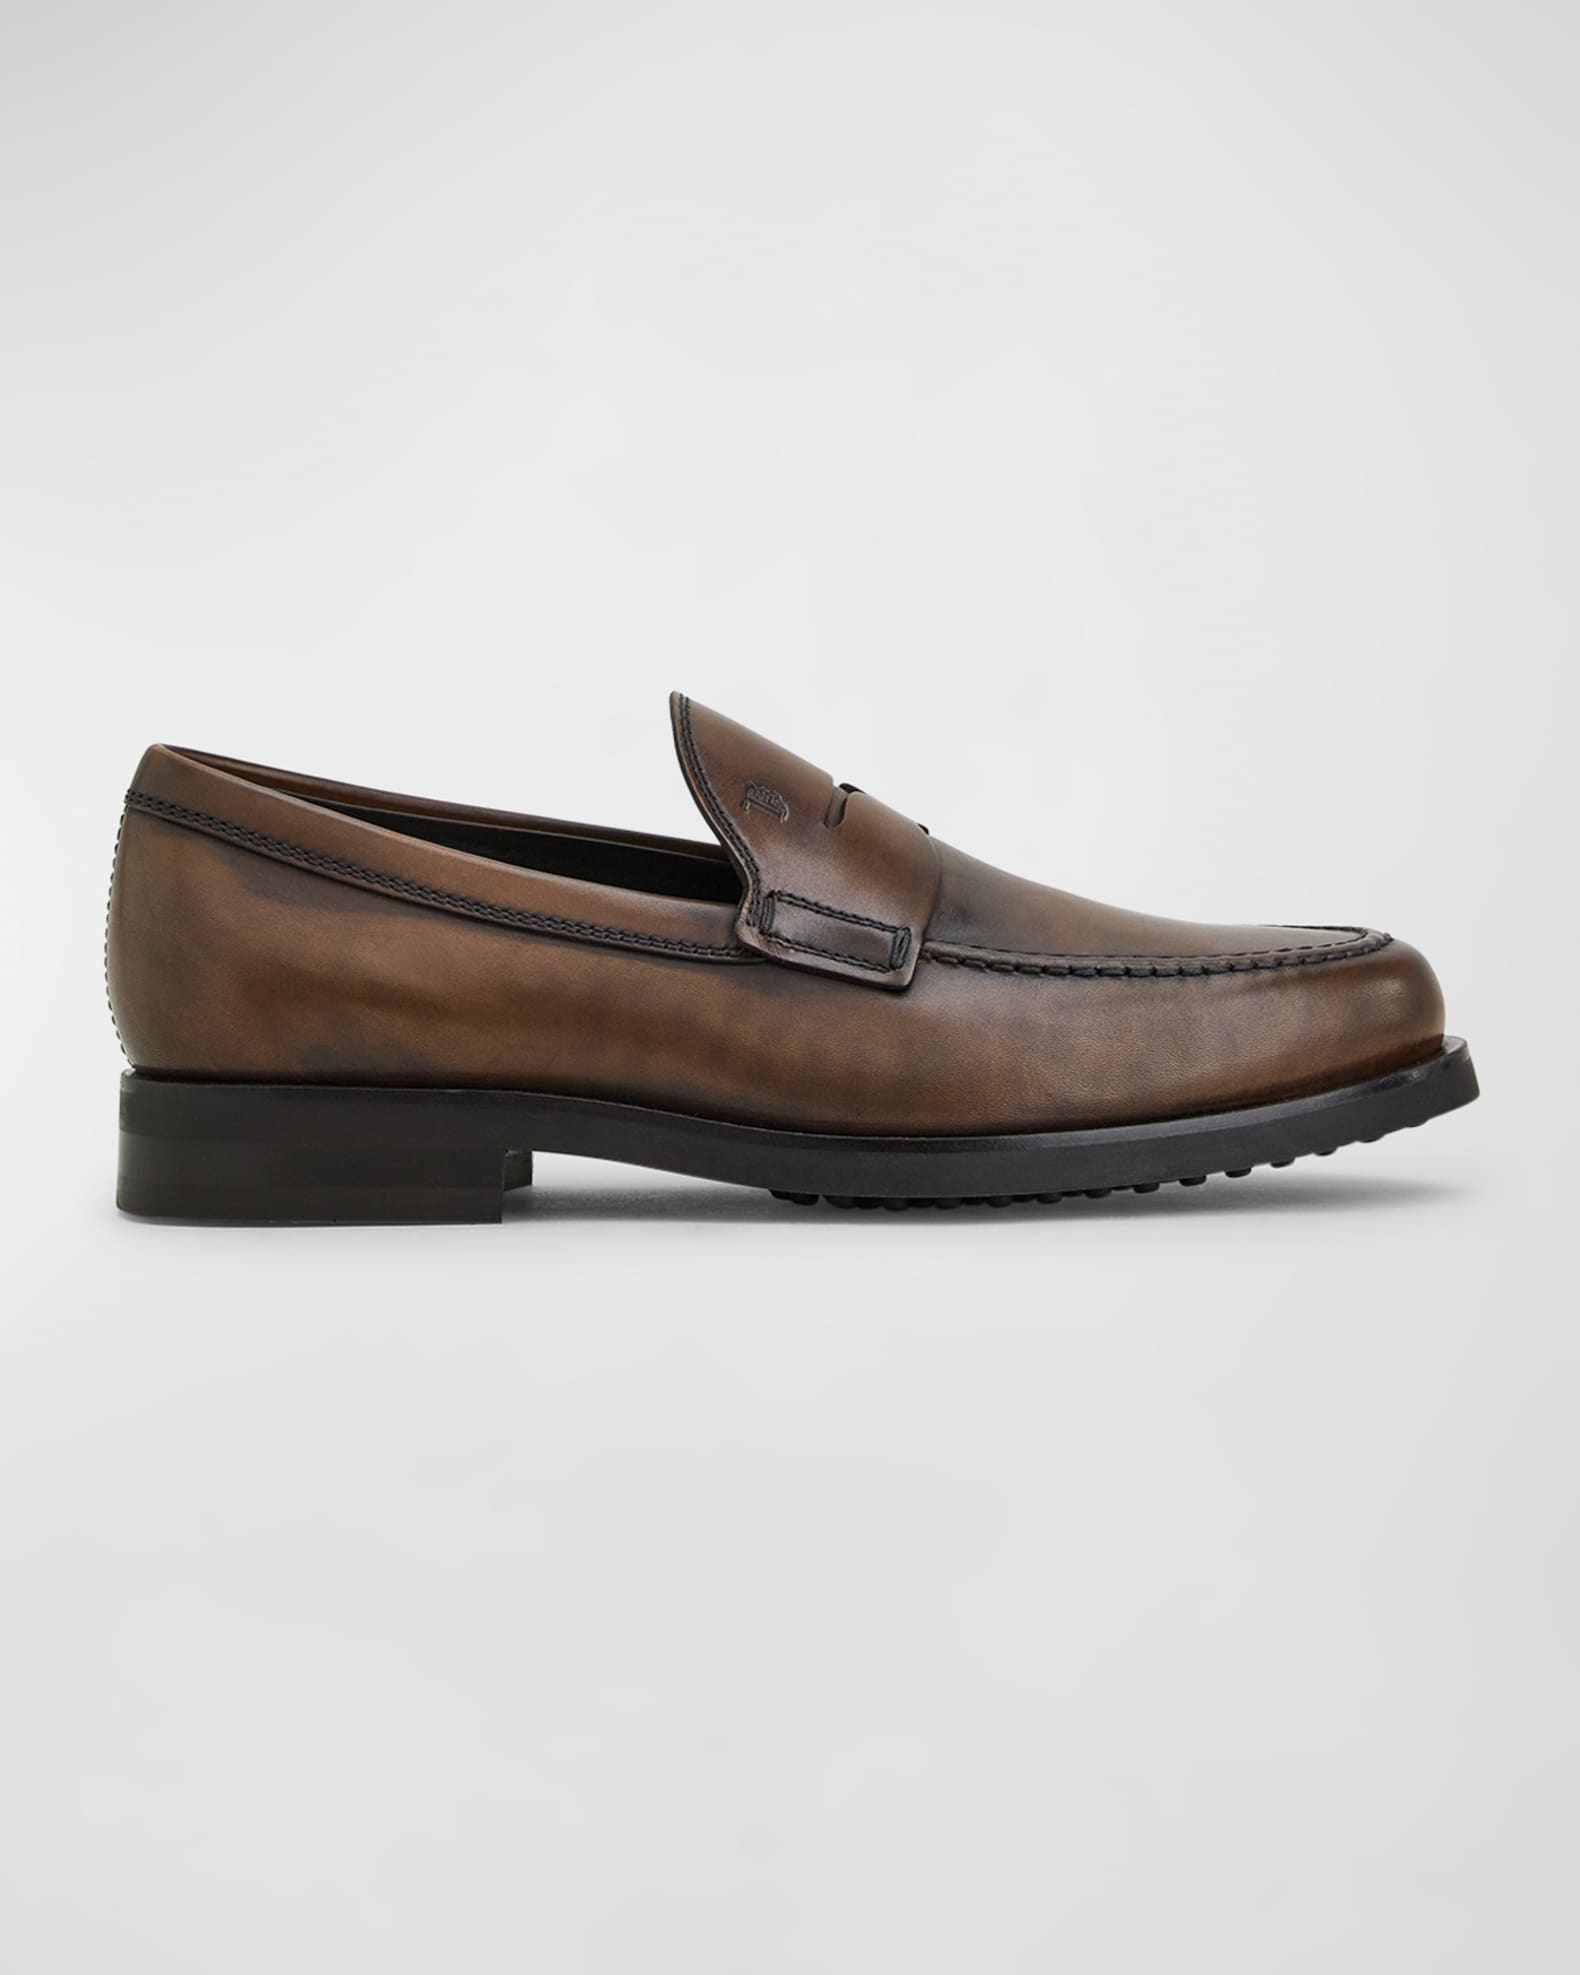 Men Loafer Shoes When & Why To Wear Loafers [Expert Guide]